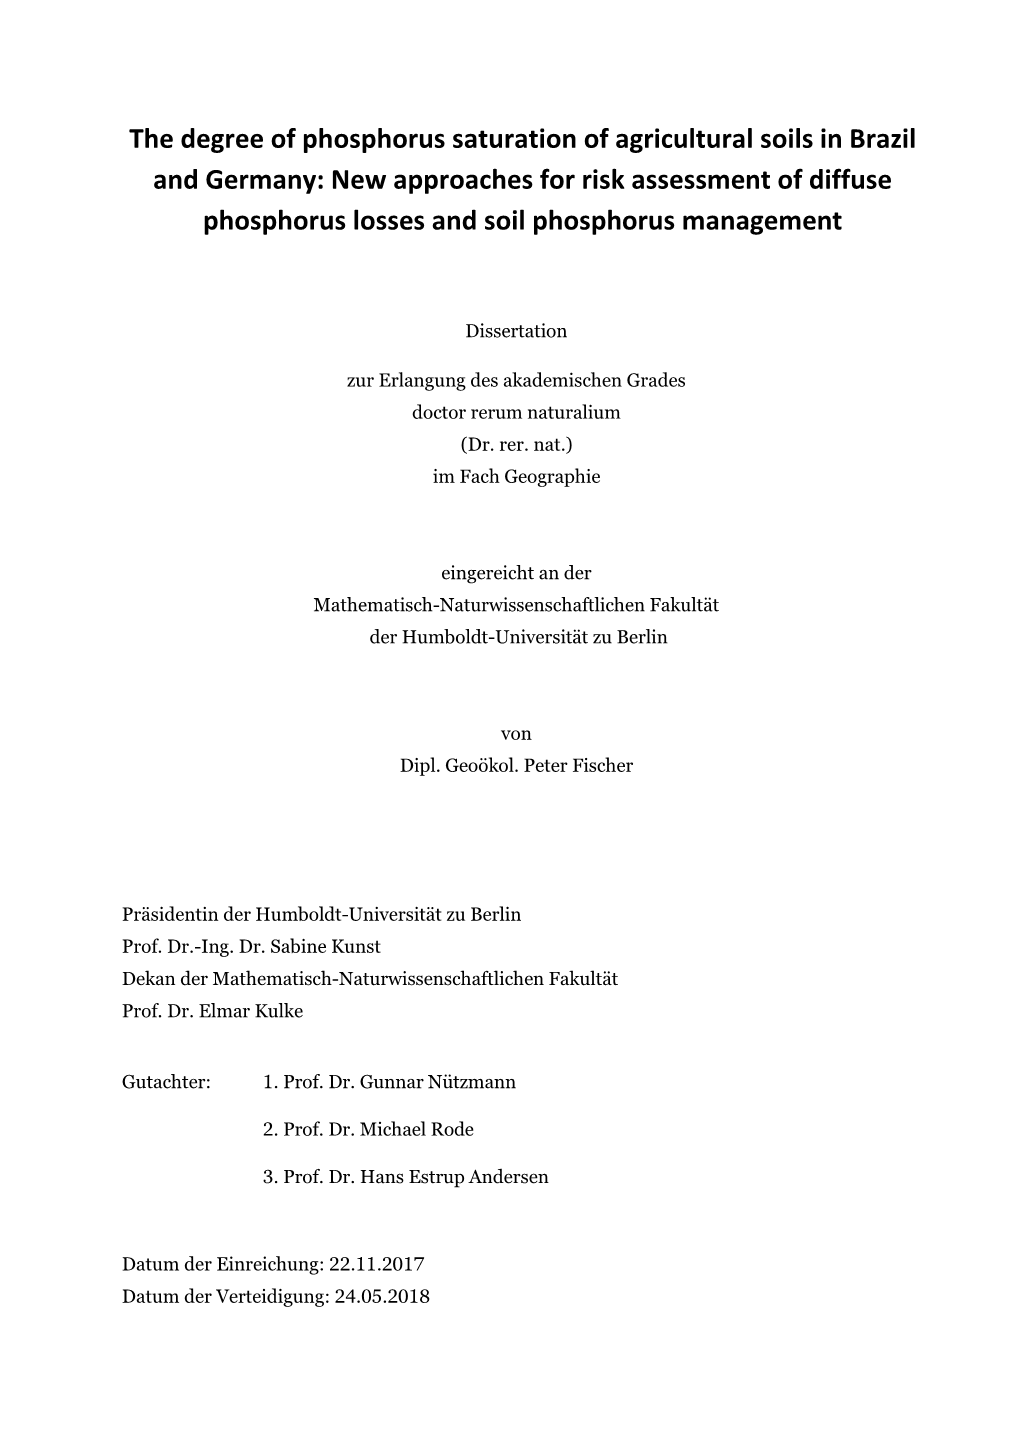 The Degree of Phosphorus Saturation of Agricultural Soils in Brazil And